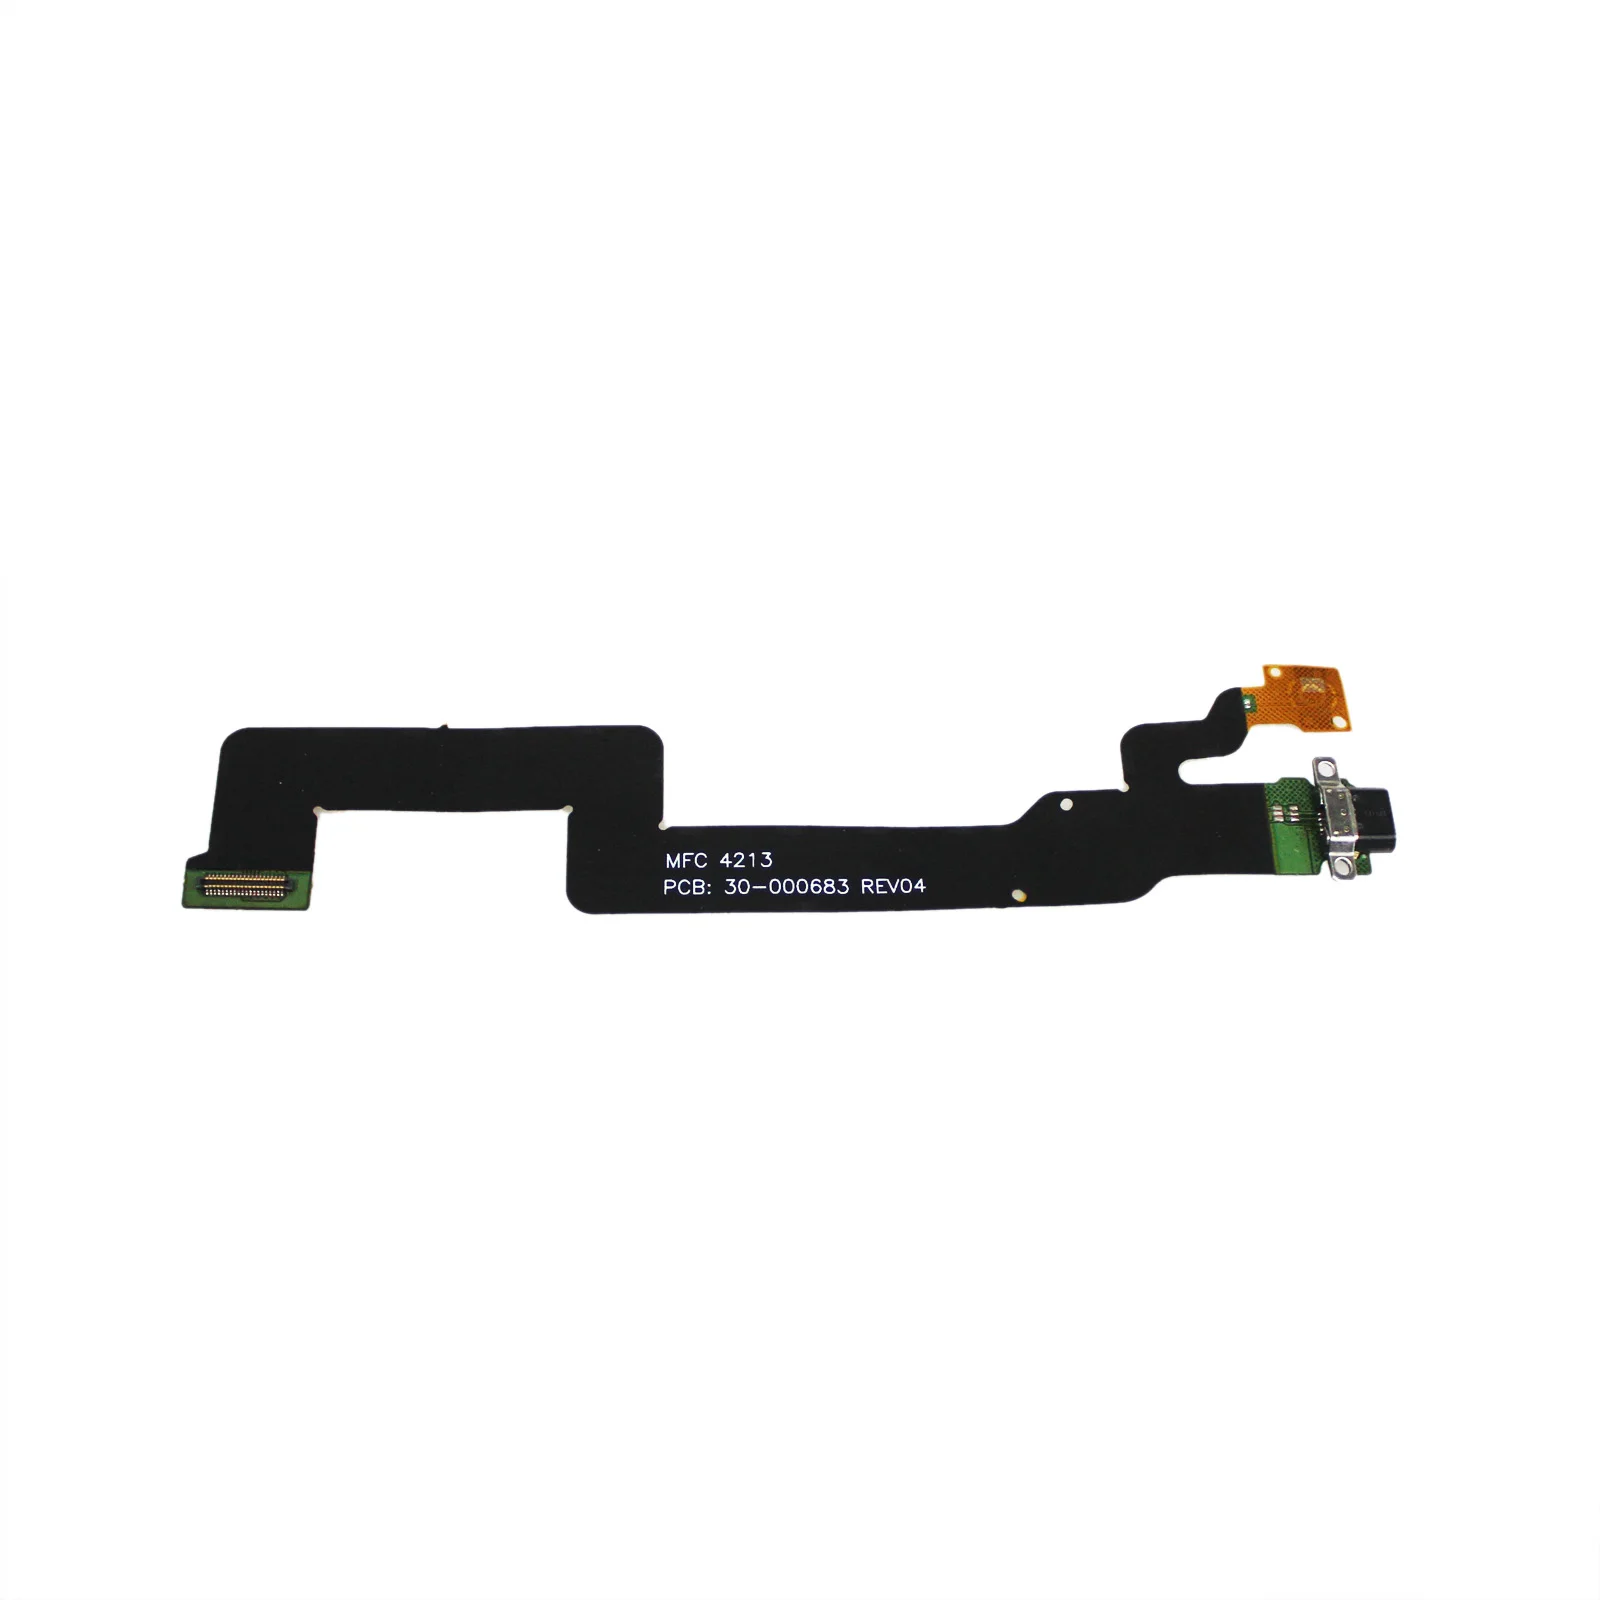 Micro USB Charger Port Flex Cable Tools for Amazon Kindle Fire HDX 7" C9R6QM 